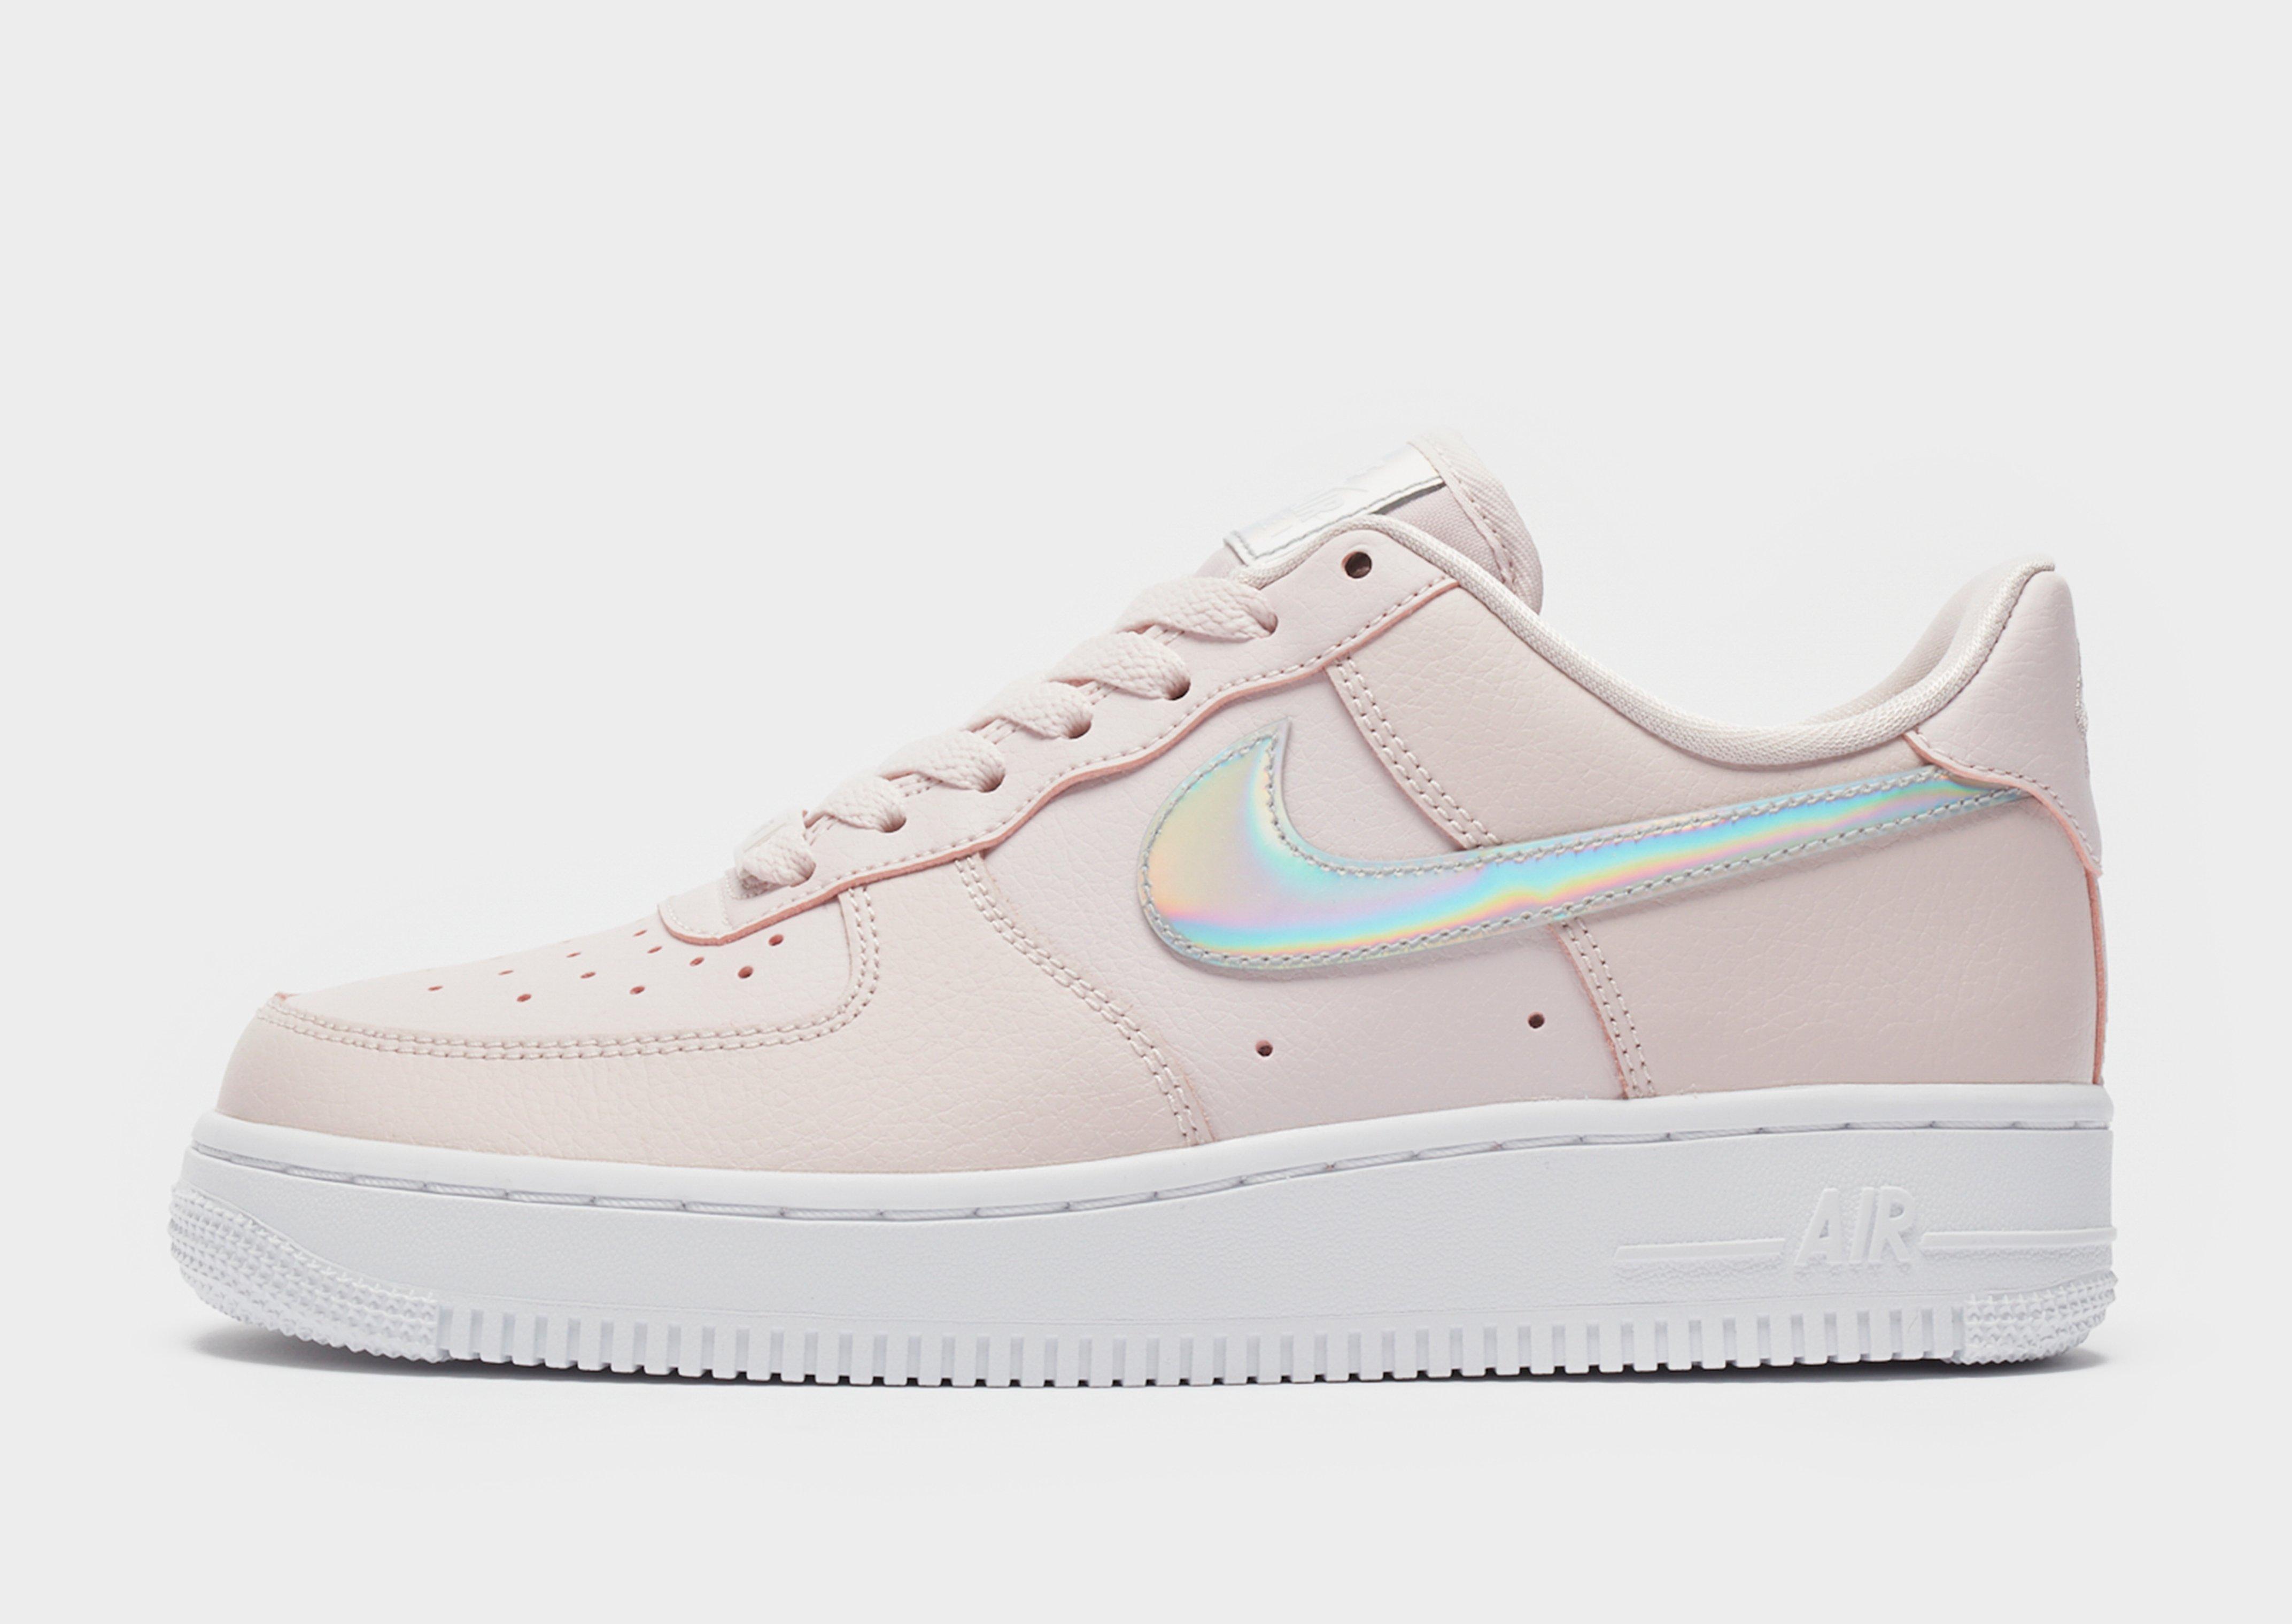 Acquista Nike Air Force 1 '07 LV8 Donna in Rosa